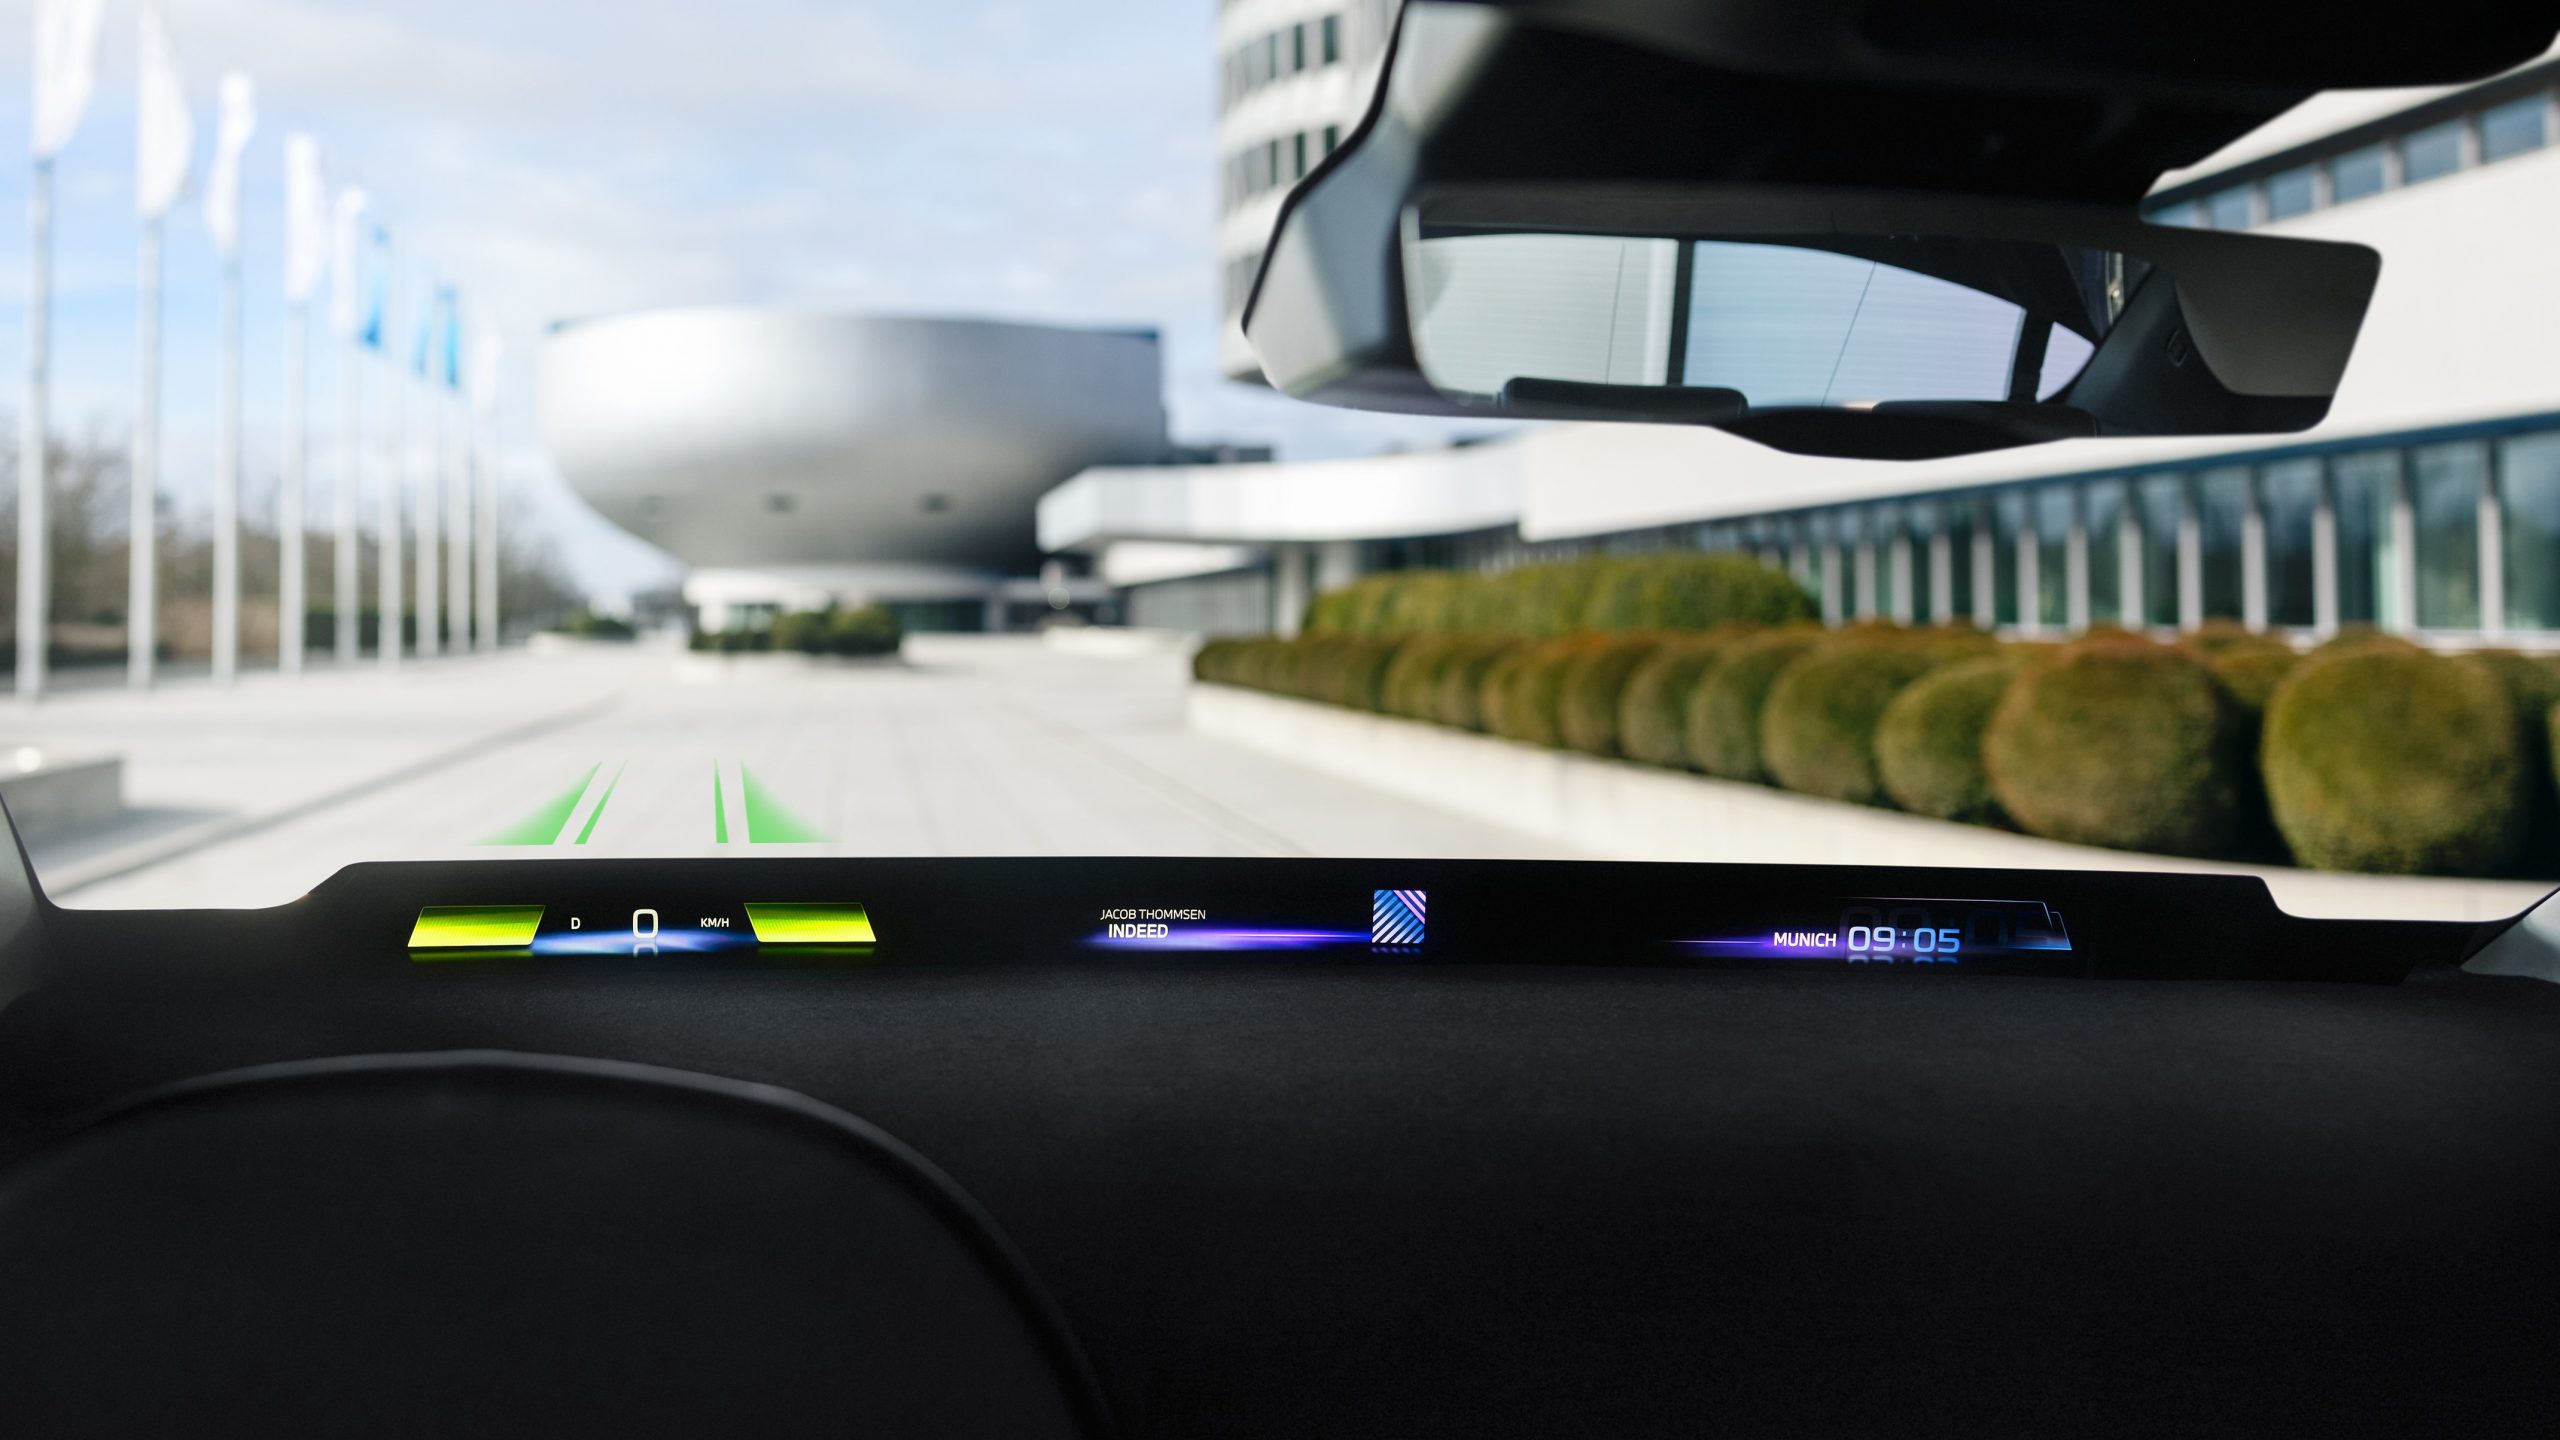 panoramic vision display will be hud of the future for bmw’s neue klasse models (w/video)